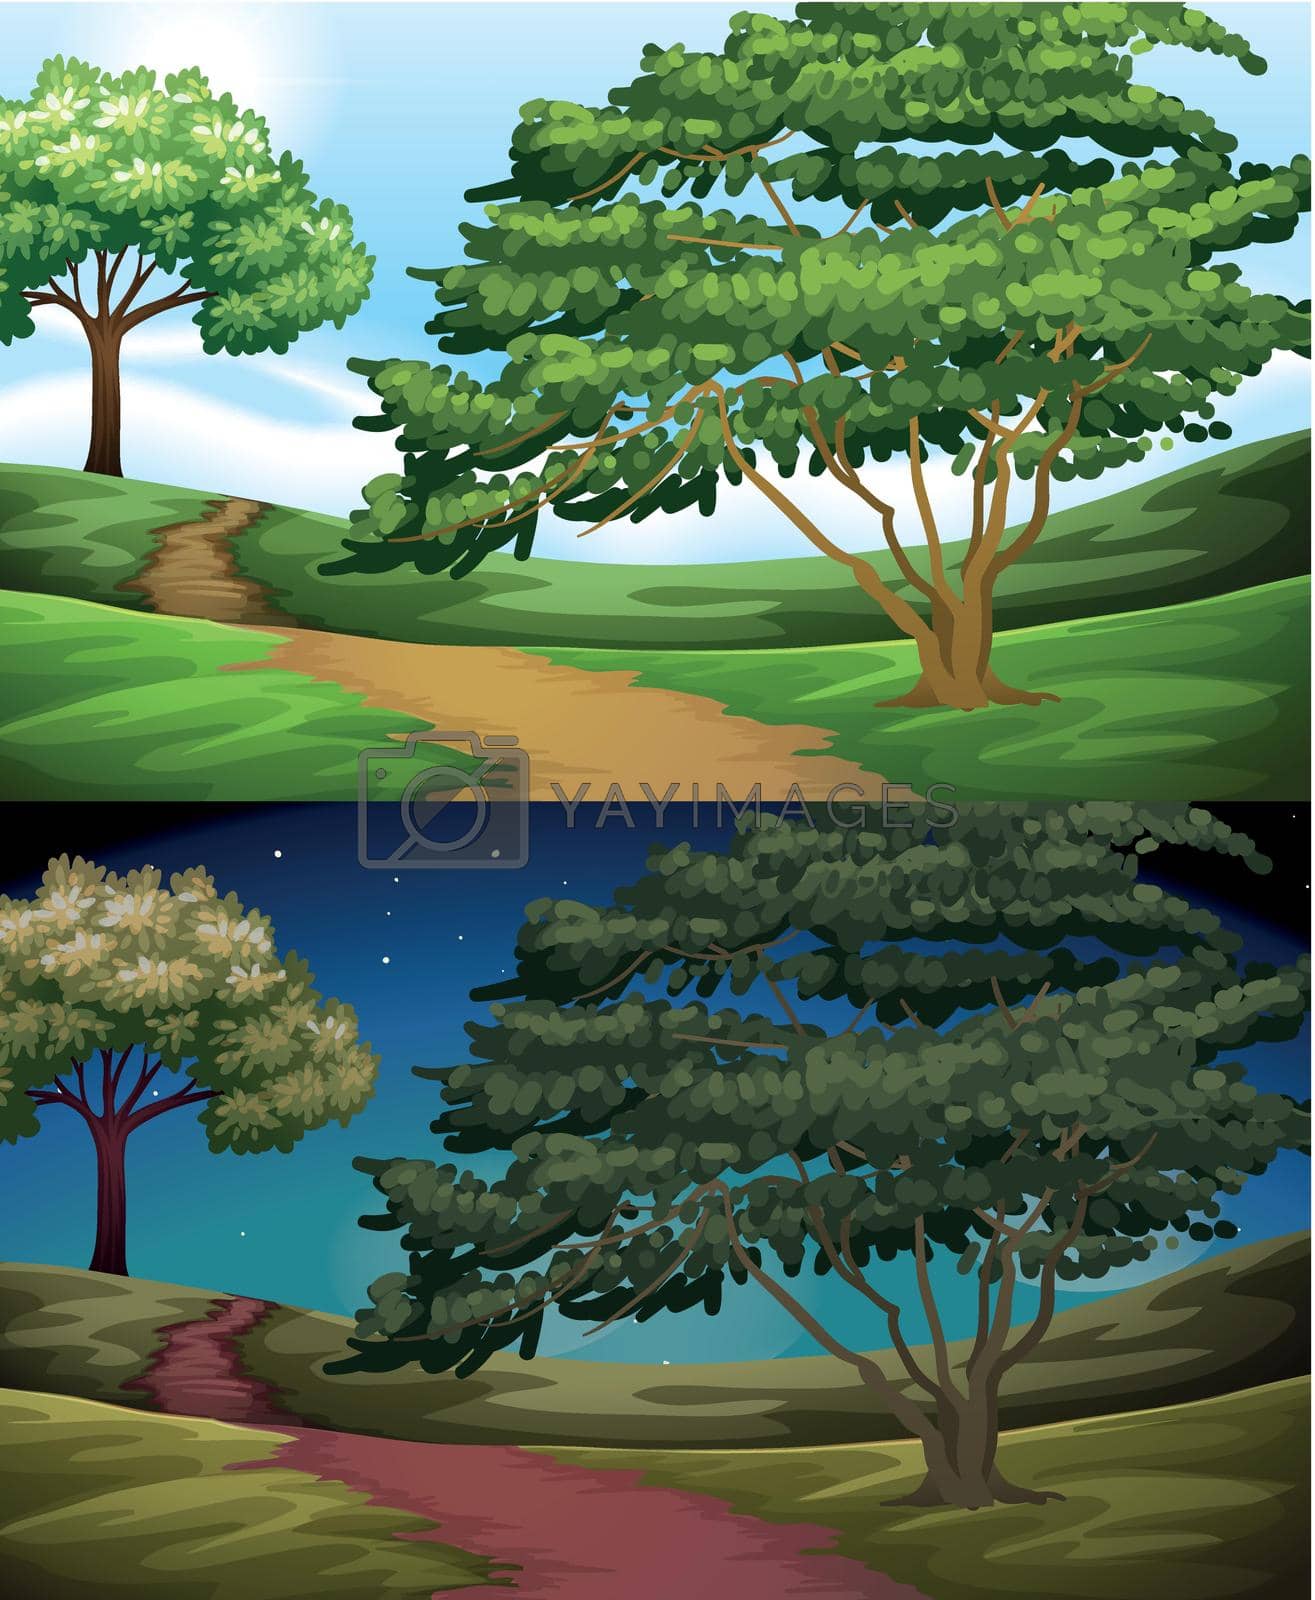 Nature scene of the countryside at day and night illustration